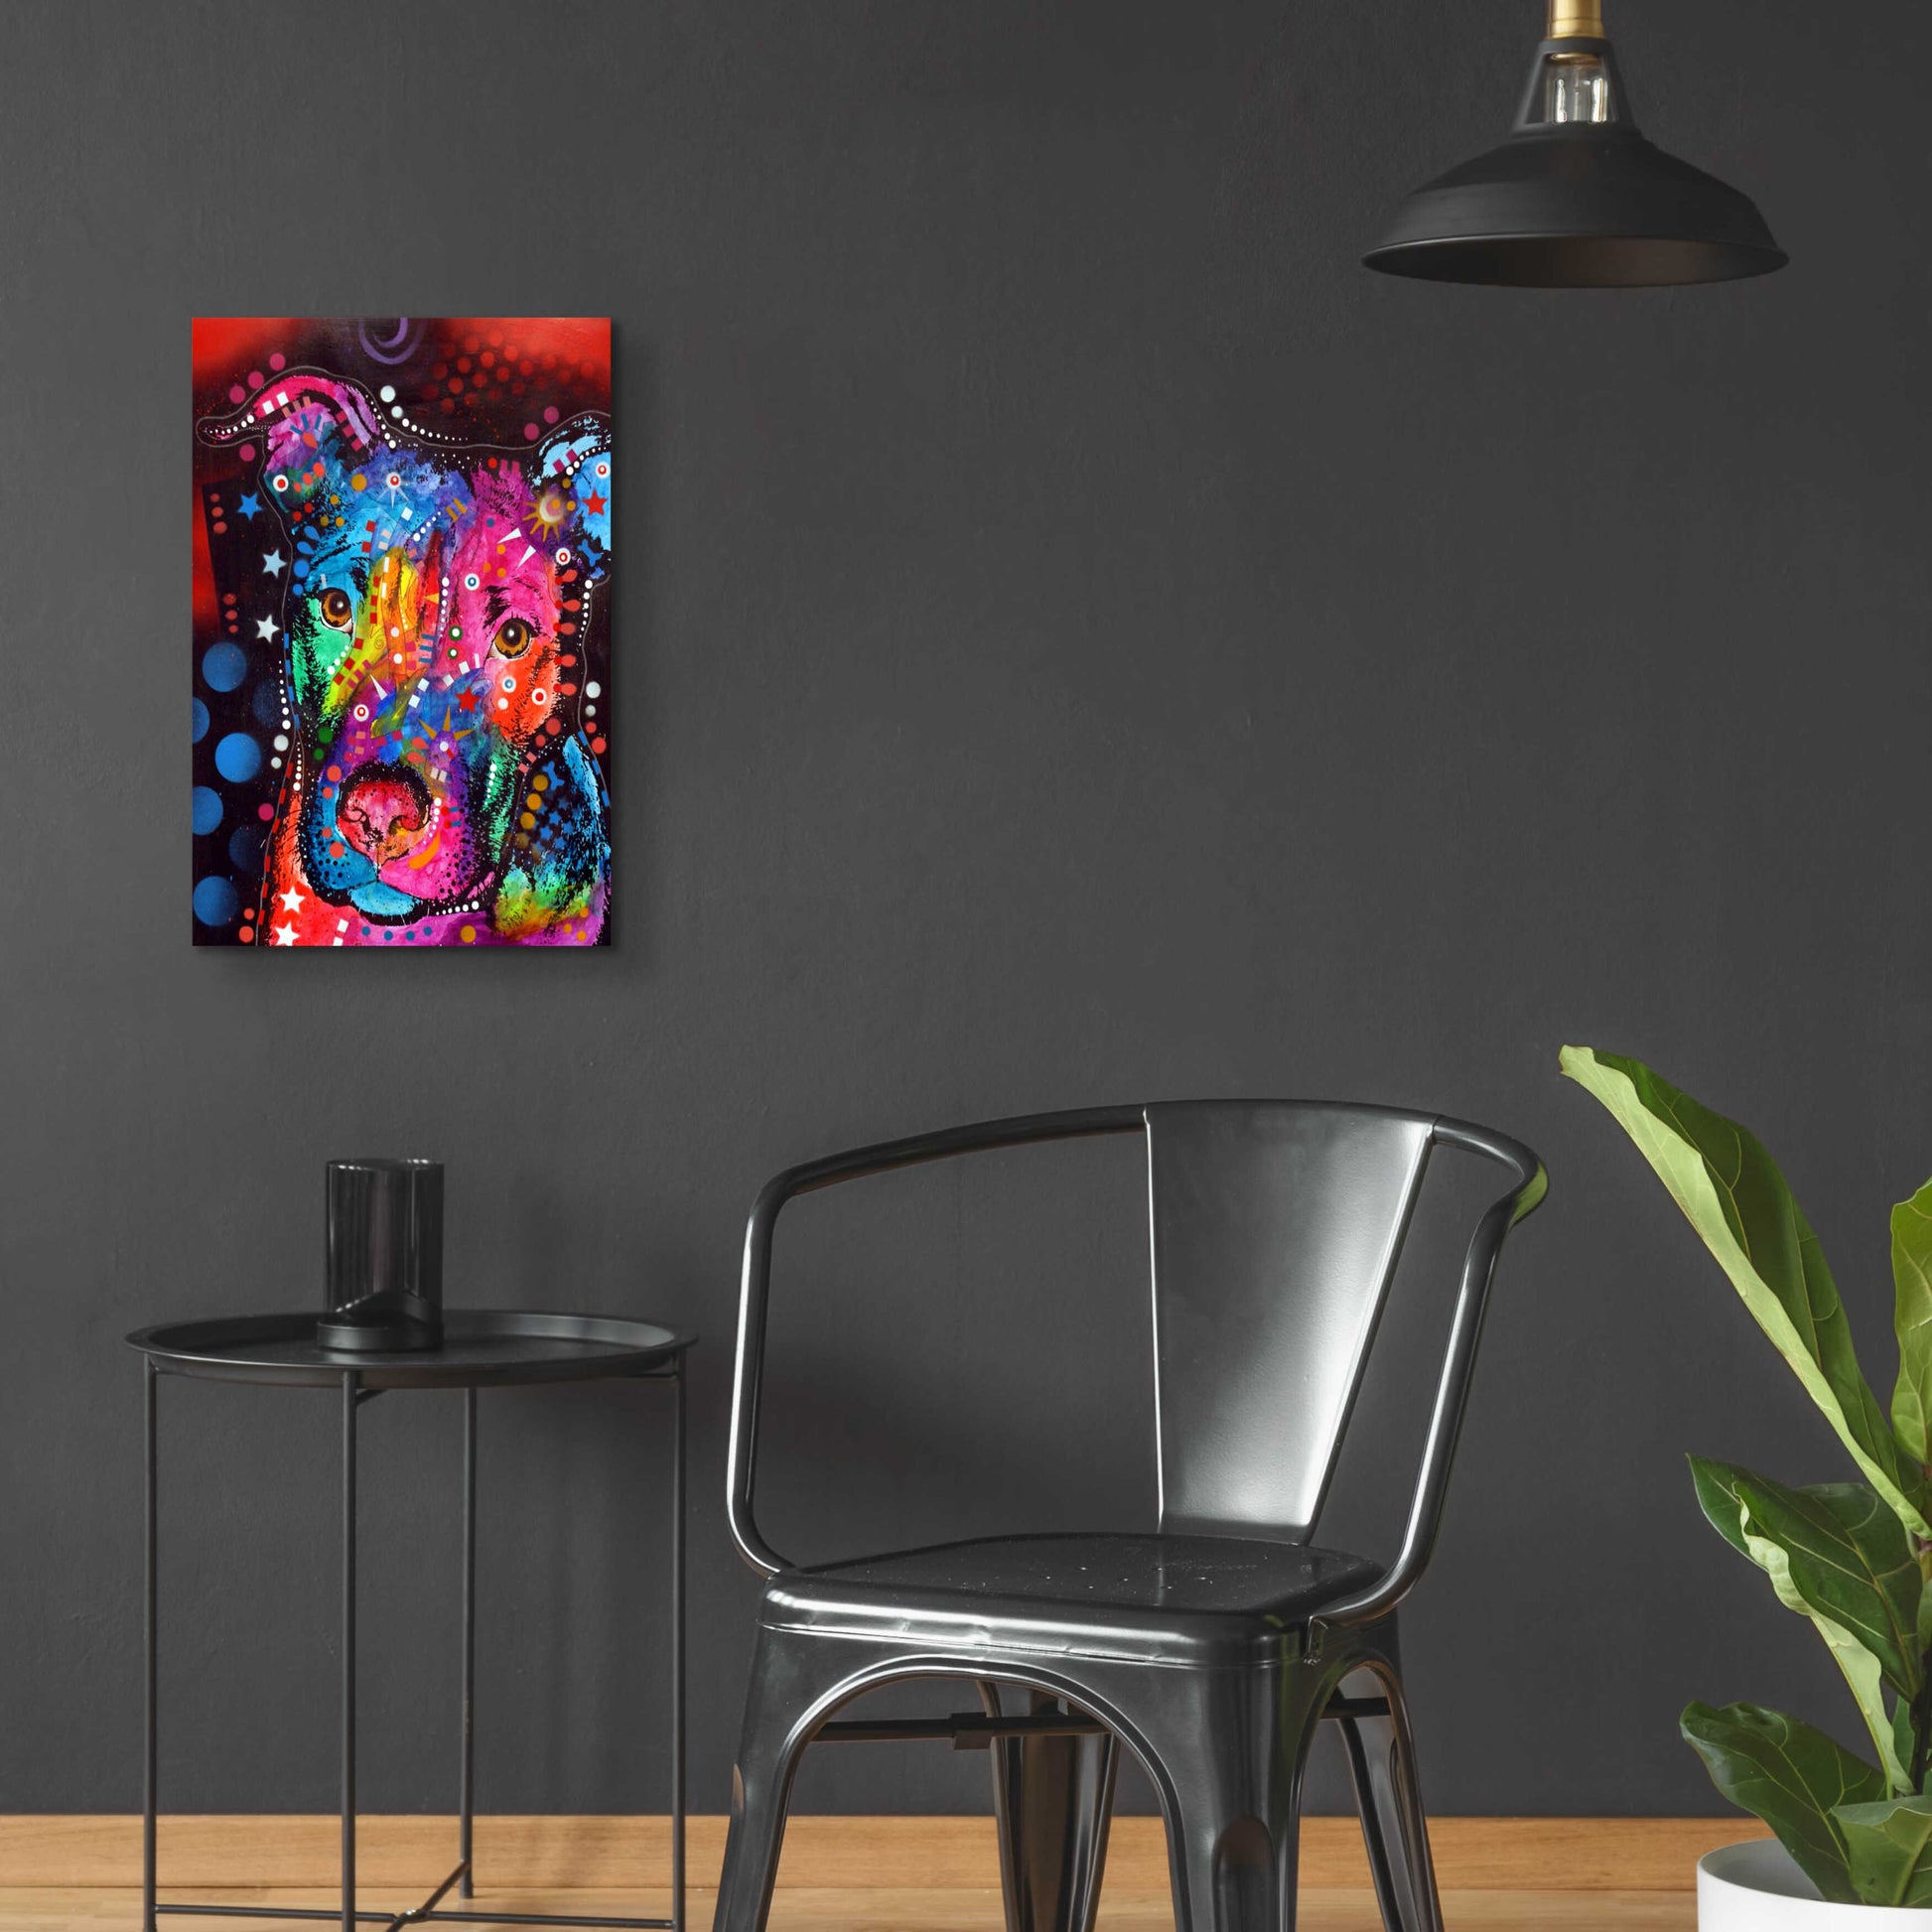 Epic Art 'Young Bull 120610' by Dean Russo, Acrylic Glass Wall Art,16x24